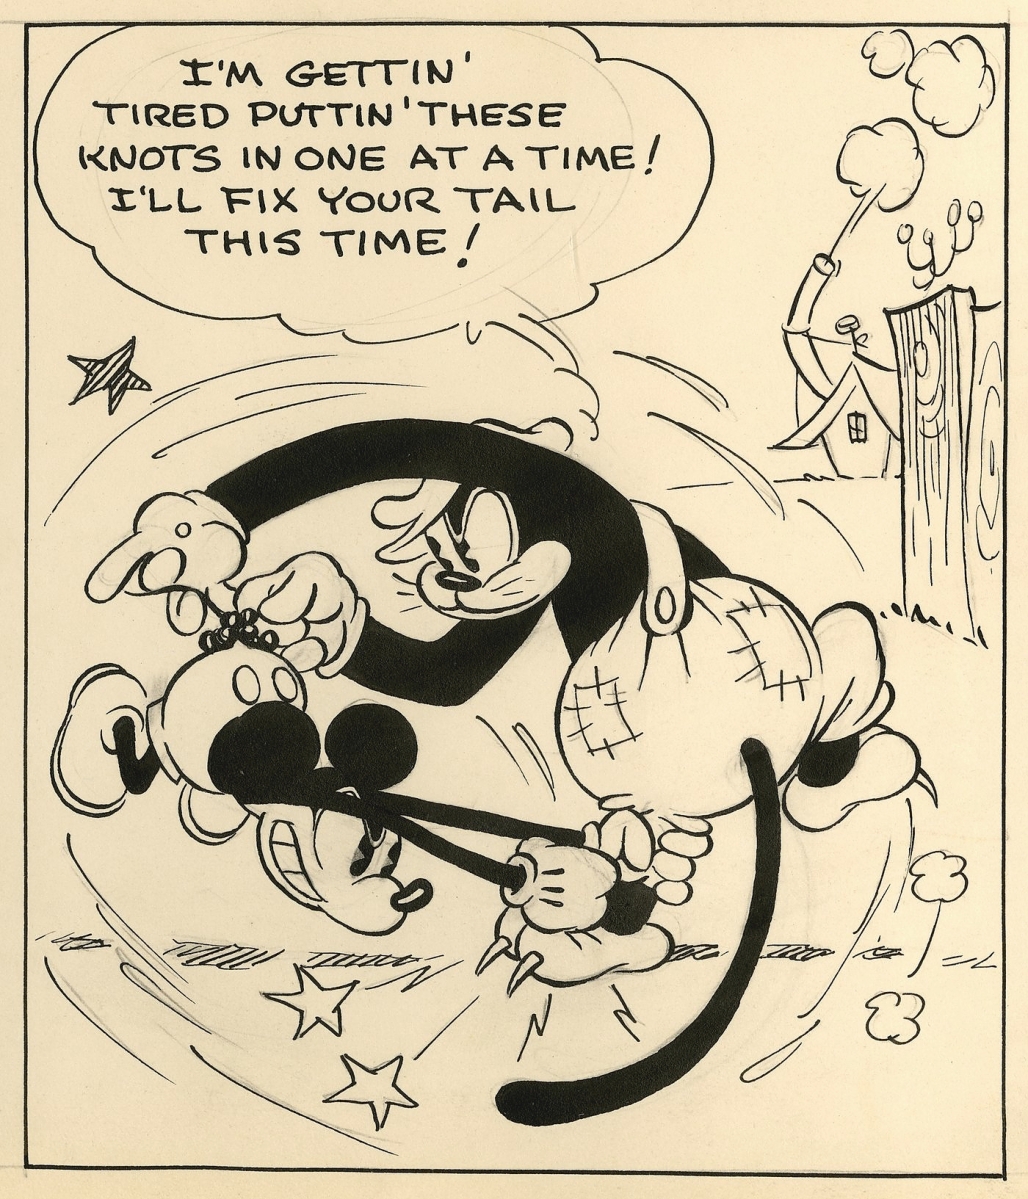 From 1931, this pen and ink original art Mickey Mouse strip was created by Floyd Gottfredson and Earl Duvall. While Gottfredson would create Mickey Mouse strips his entire career from the 1930s through his retirement in 1975, Duvall worked with Disney for a short period of time. This example was from the Mickey Mouse vs Kat Nipp storyline and lasted five panels. It brought $61,739.